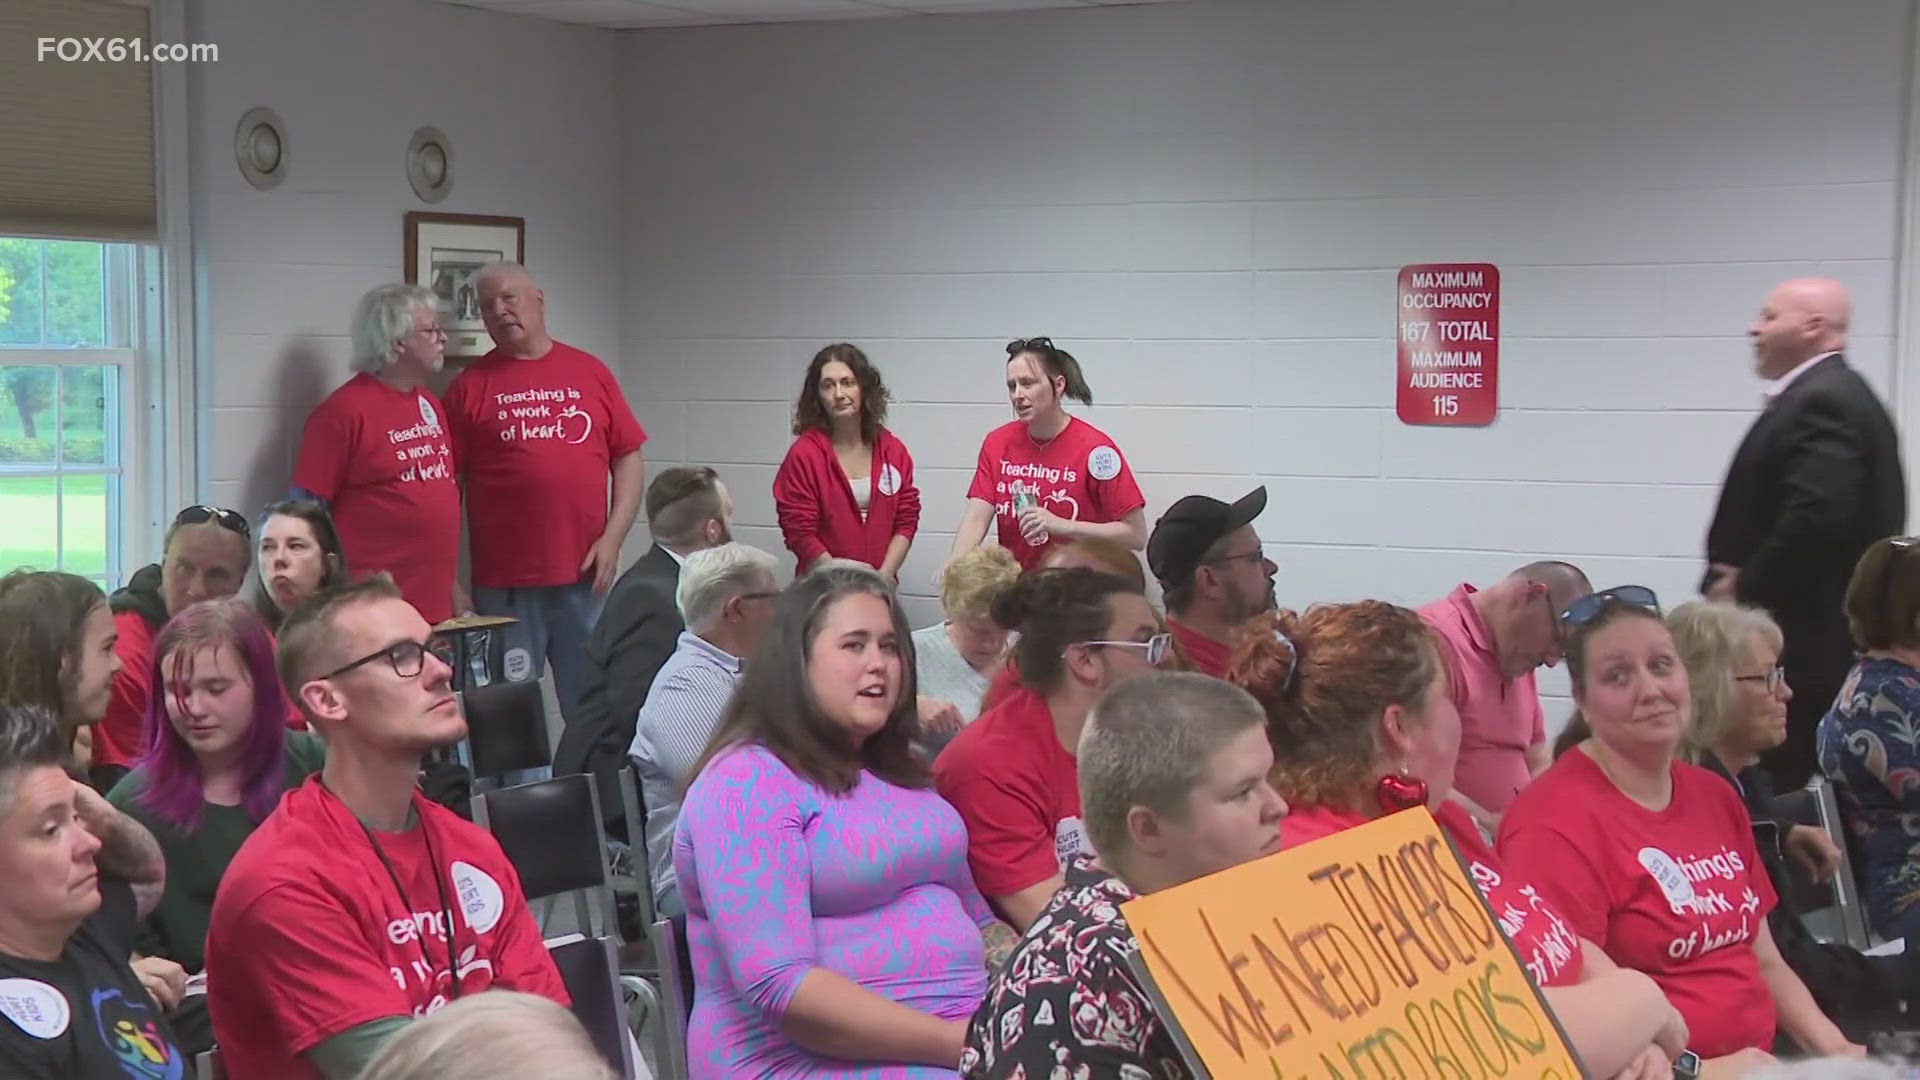 The town council voted 7-4 to pass an education budget that did not include the increase the Board of Education was hoping for, putting 121 jobs on the line.